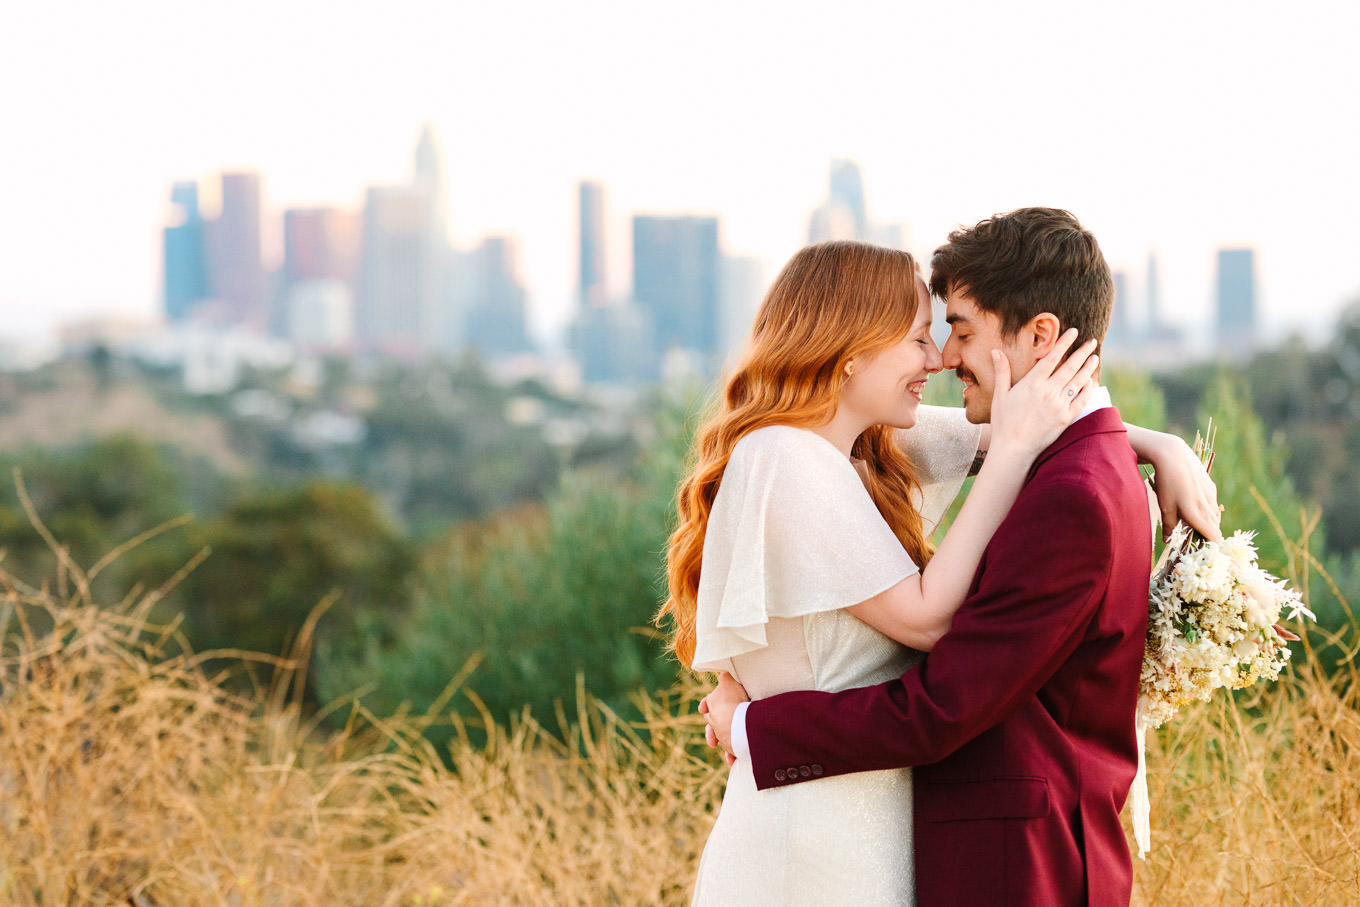 Elopement portrait in front of LA skyline | Los Angeles Elysian Park Elopement | Colorful and elevated wedding photography for fun-loving couples in Southern California | #LosAngelesElopement #elopement #LAarboretum #LAskyline #elopementphotos   Source: Mary Costa Photography | Los Angeles